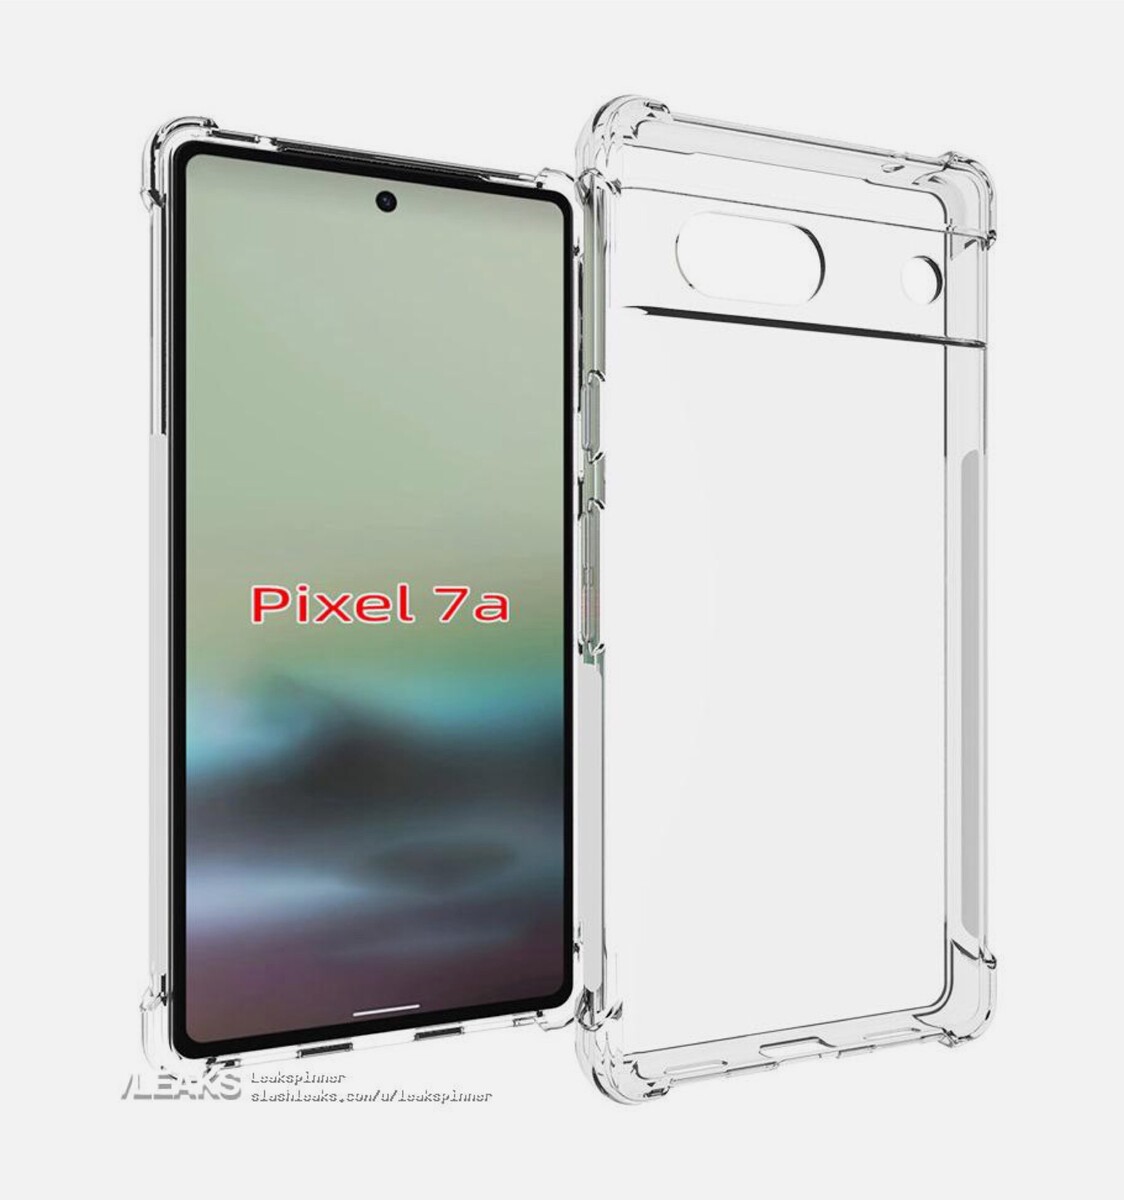 csm_google_pixel_7a_protective_case_matches_previously_leaked_design_36a50cf432.jpg